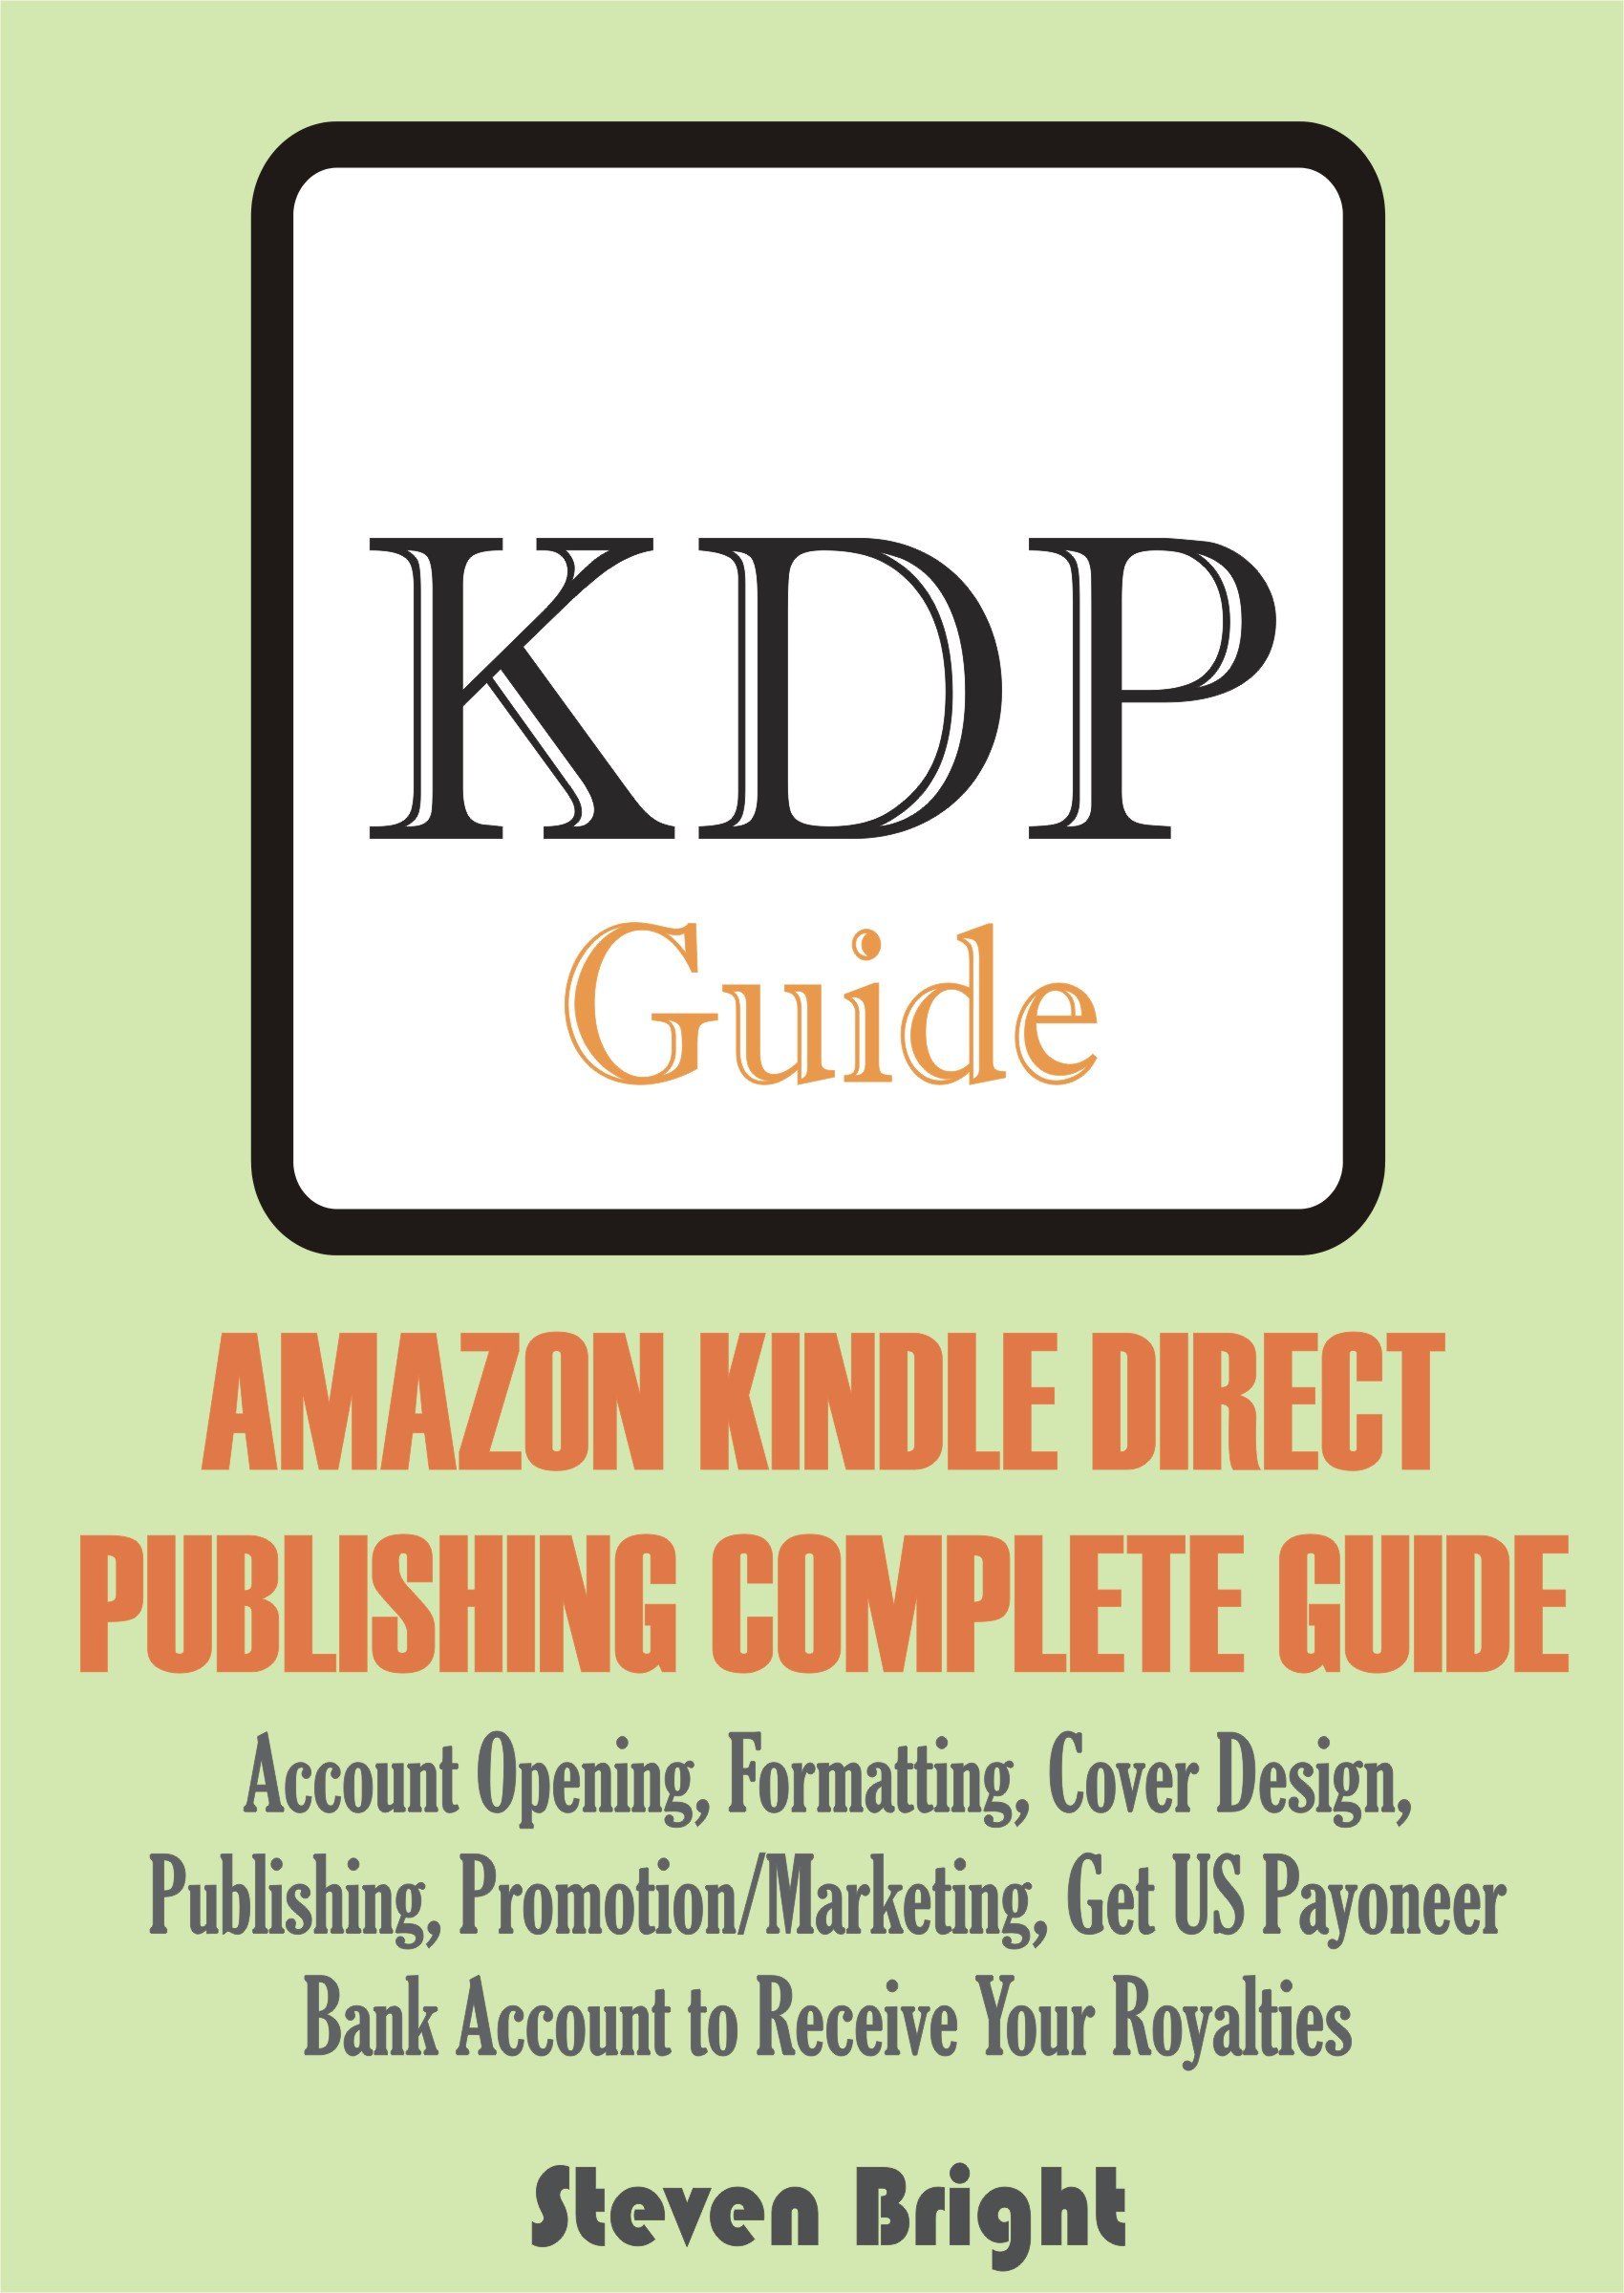 AMAZON KINDLE DIRECT PUBLISHING COMPLETE GUIDE: Account Opening, Formatting, Cover Design, Publishing, Promotion/Marketing, Get US Payoneer Bank Account to Receive Your Royalties